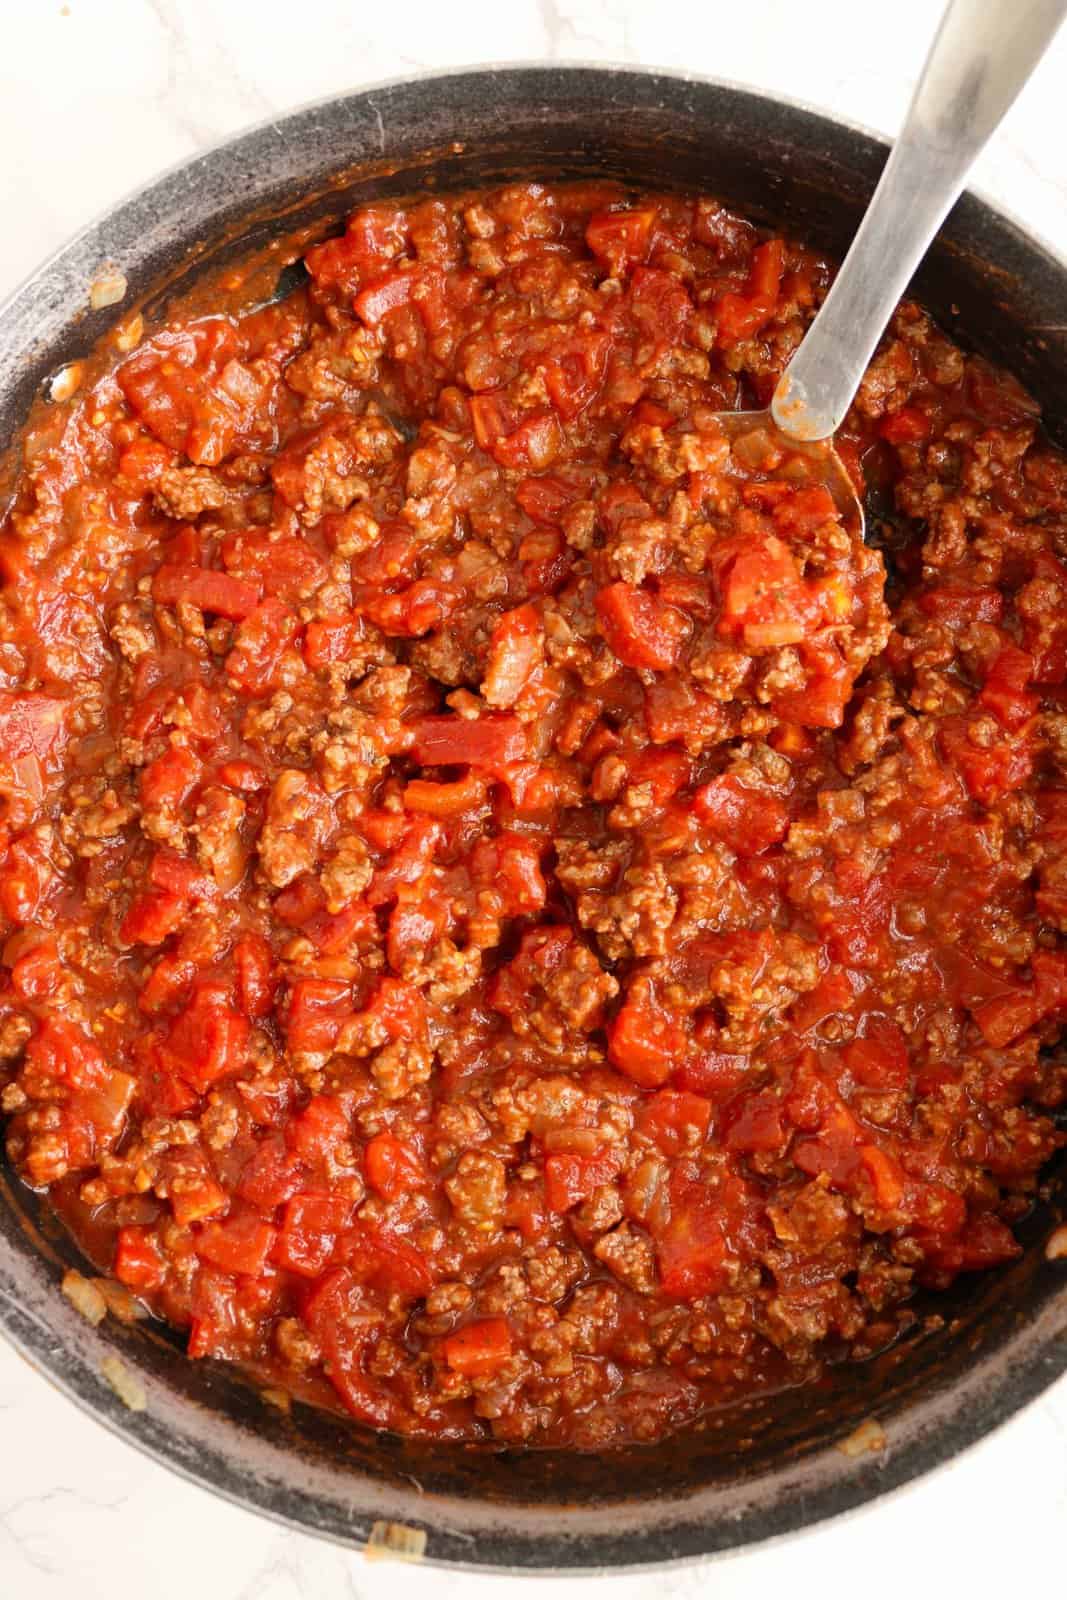 Tomato mixture added to beef mixture.